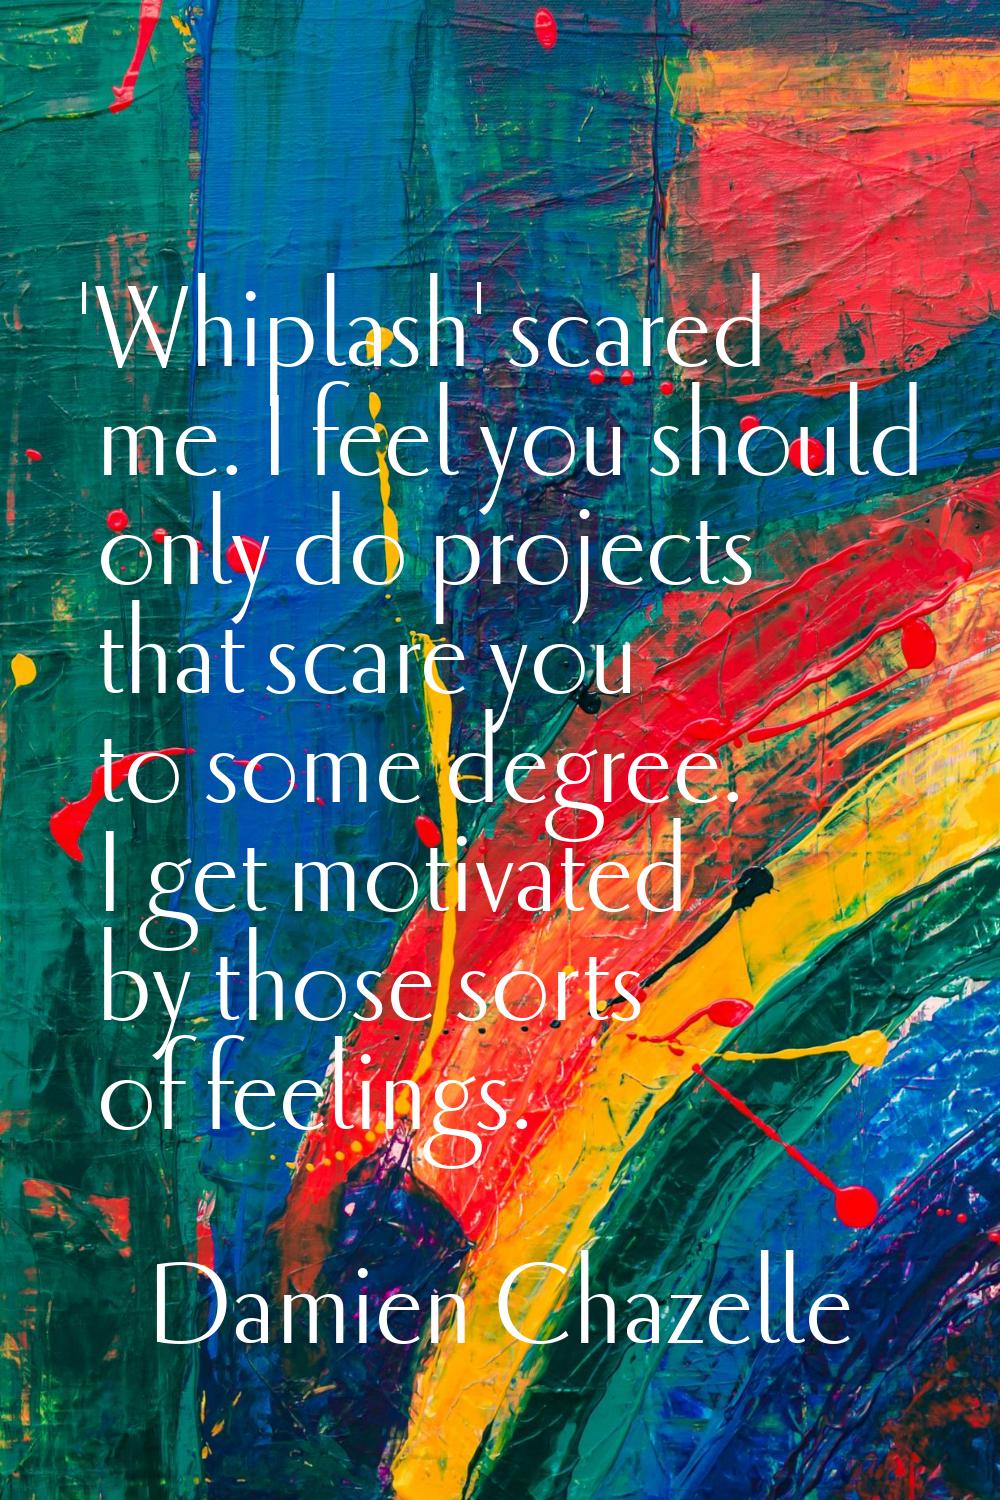 'Whiplash' scared me. I feel you should only do projects that scare you to some degree. I get motiv